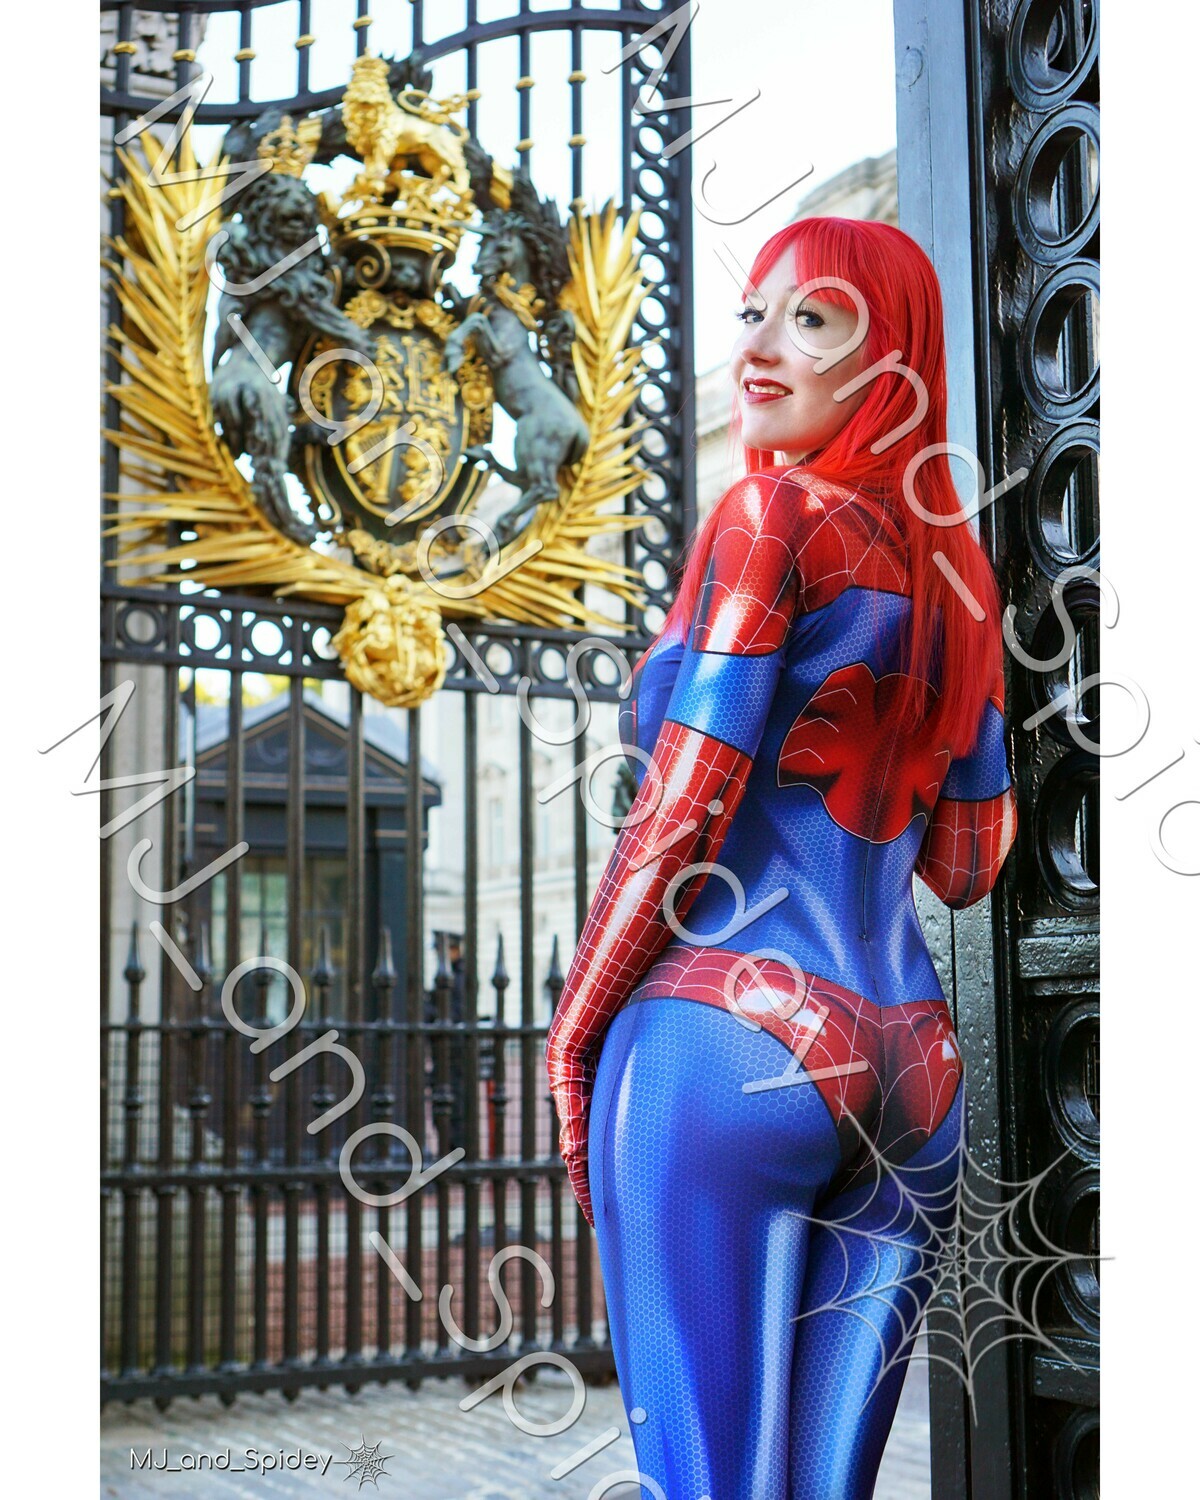 Marvel - Spider-Man - Mary Jane Watson - Classic Spider-Suit - UK No. 2 - 8x10 Cosplay Print (@MJ_and_Spidey, MJ and Spidey, Comics)